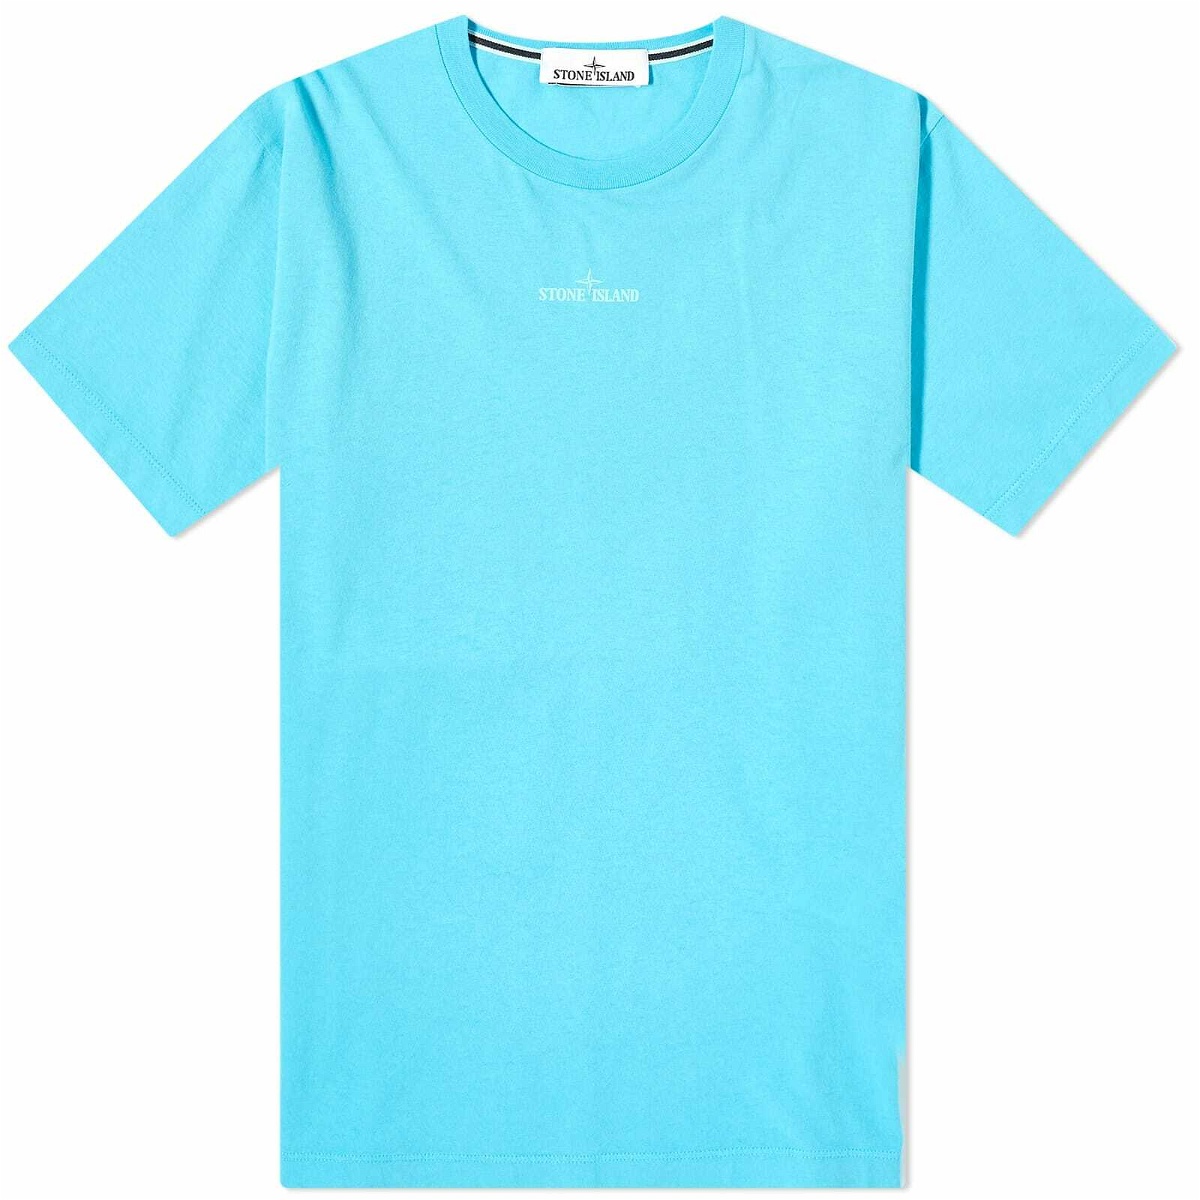 Photo: Stone Island Men's Abbreviation Three Graphic T-Shirt in Turquoise